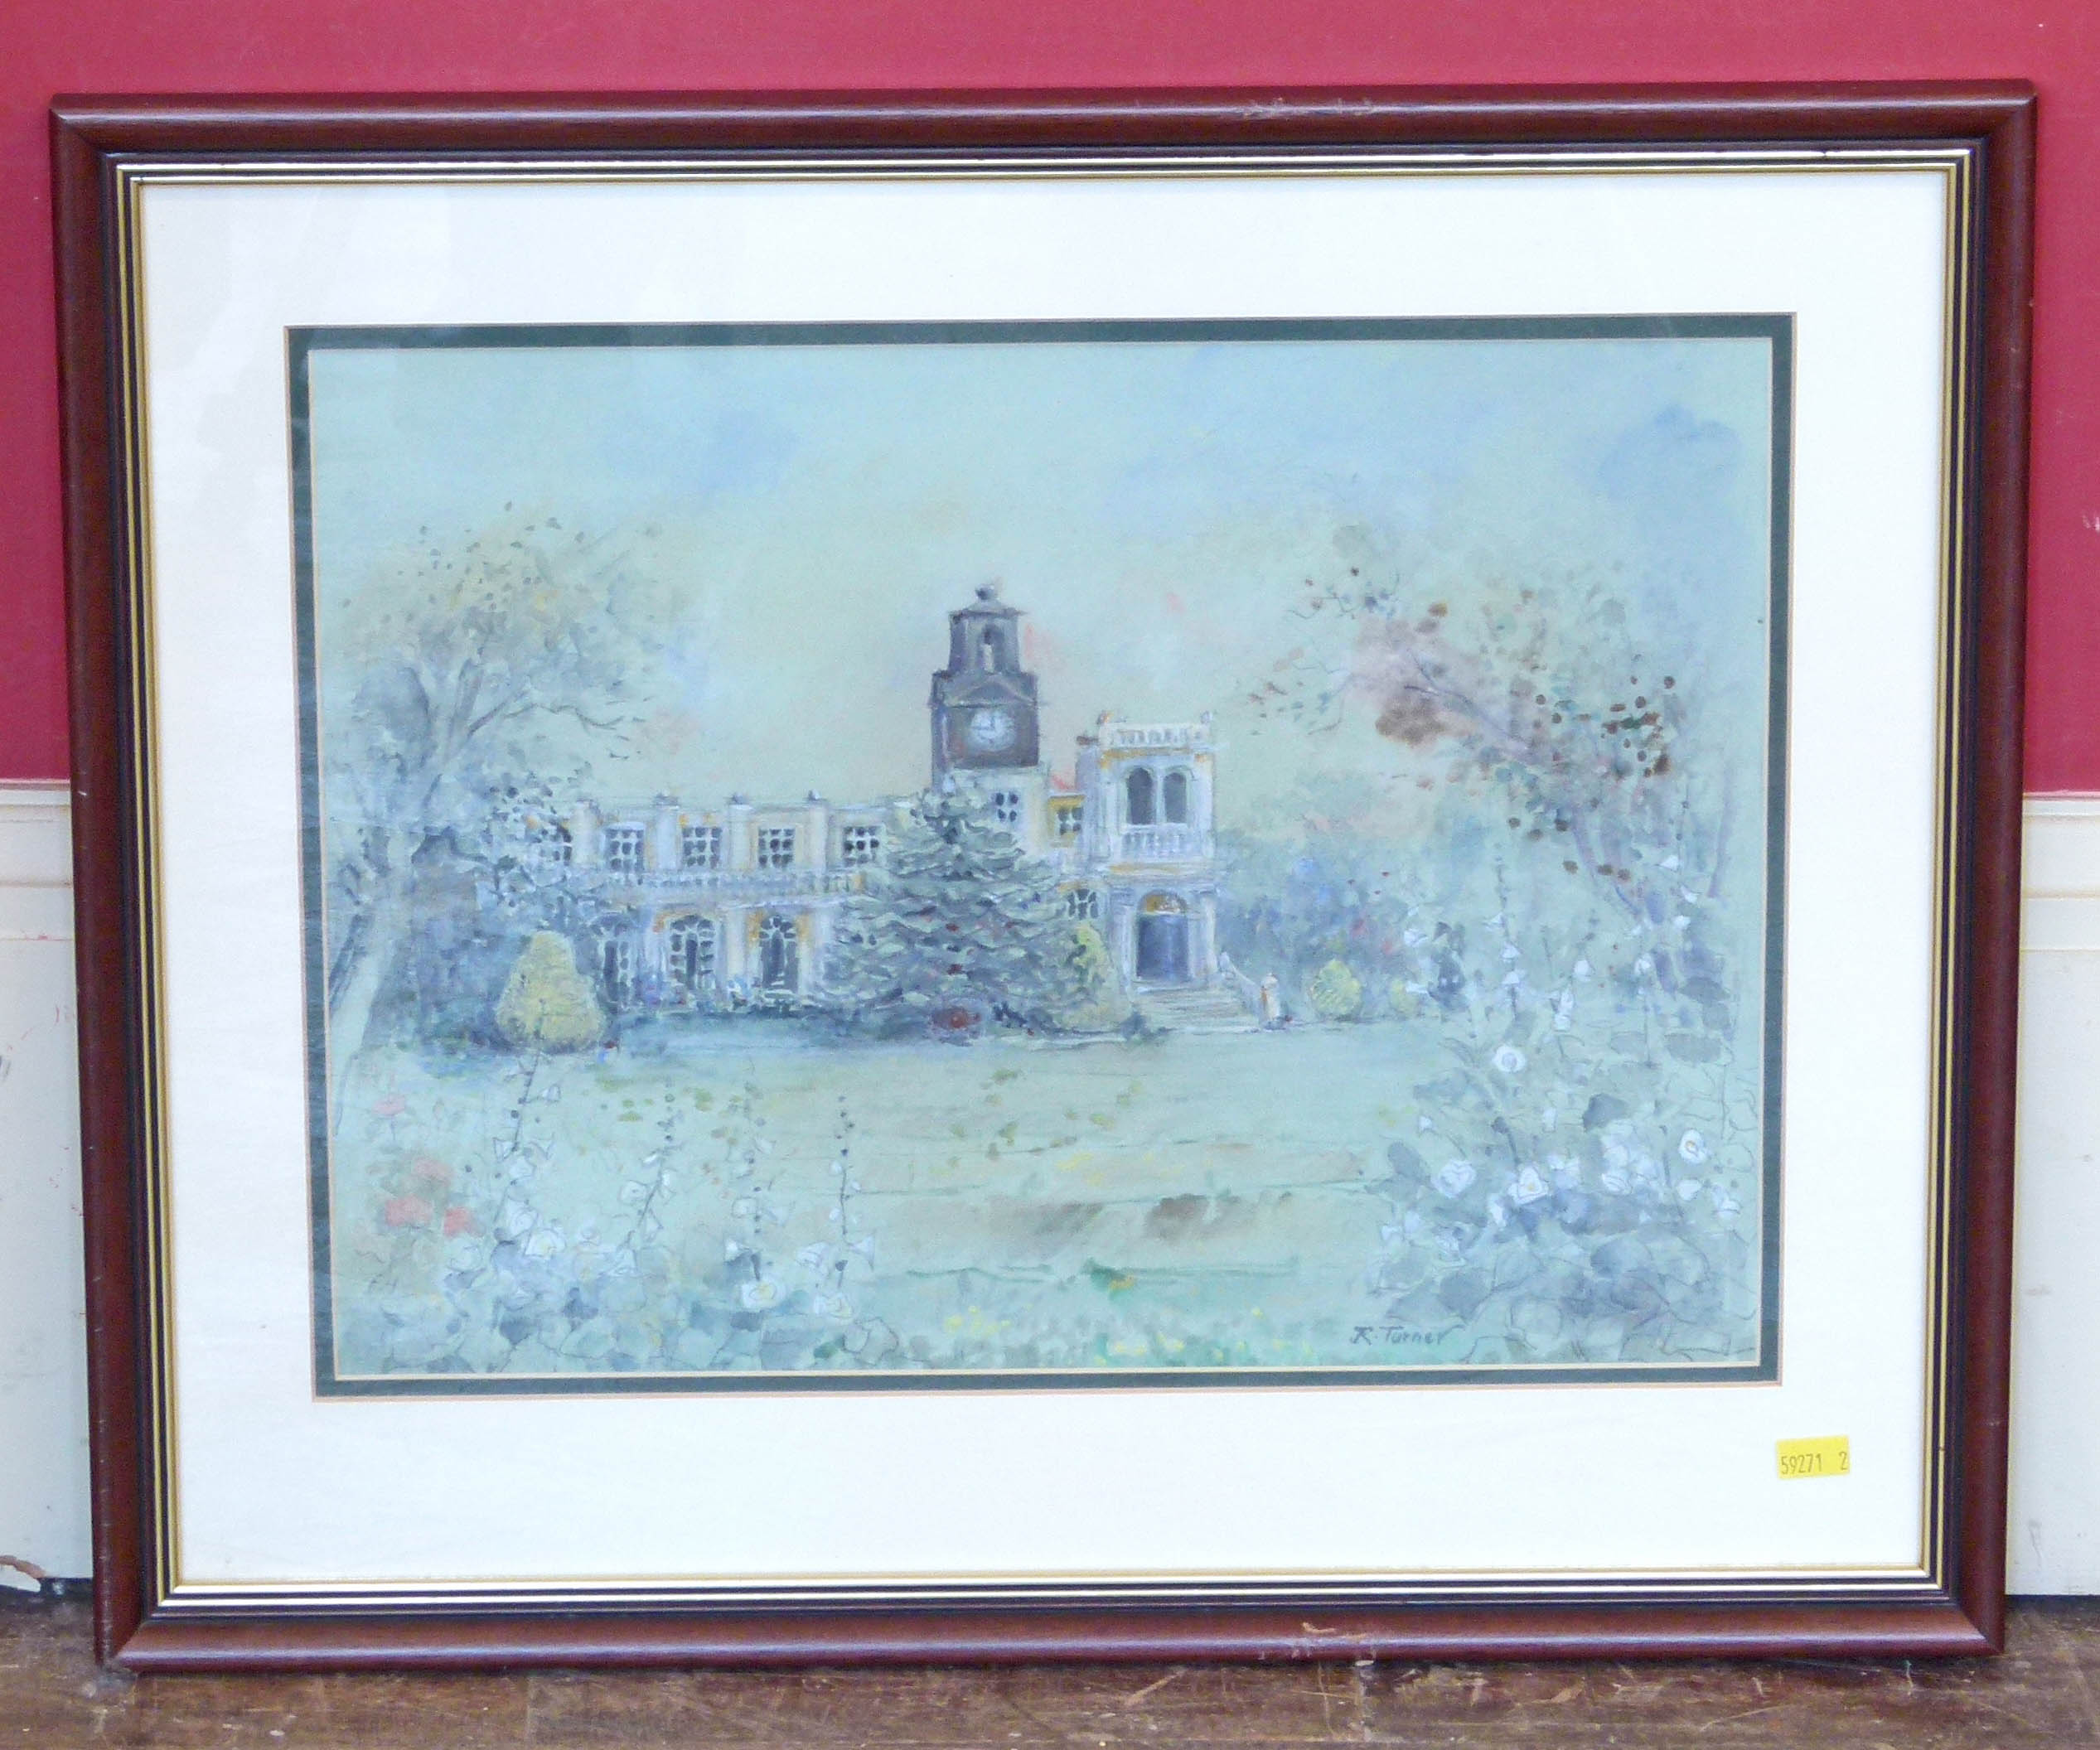 R.E. Turner, Sculpture Gallery Trentham, watercolour. Unfortunately we are not doing condition